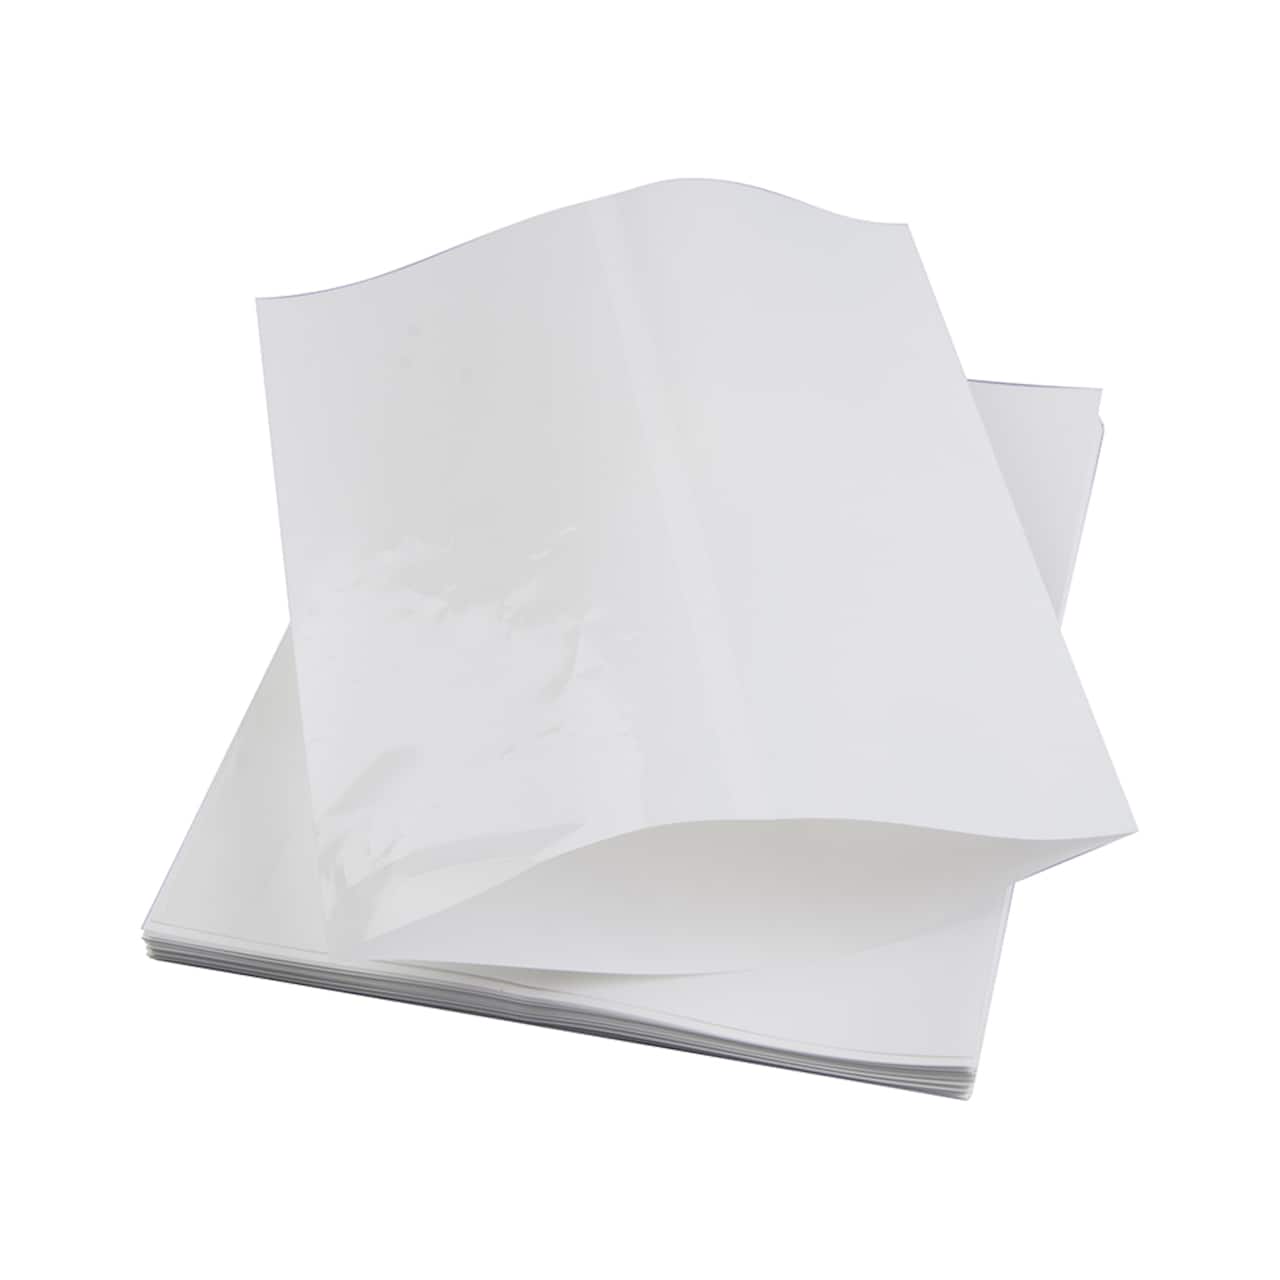 Craft Express Shrink Wrap Sleeve Pack, 50ct.